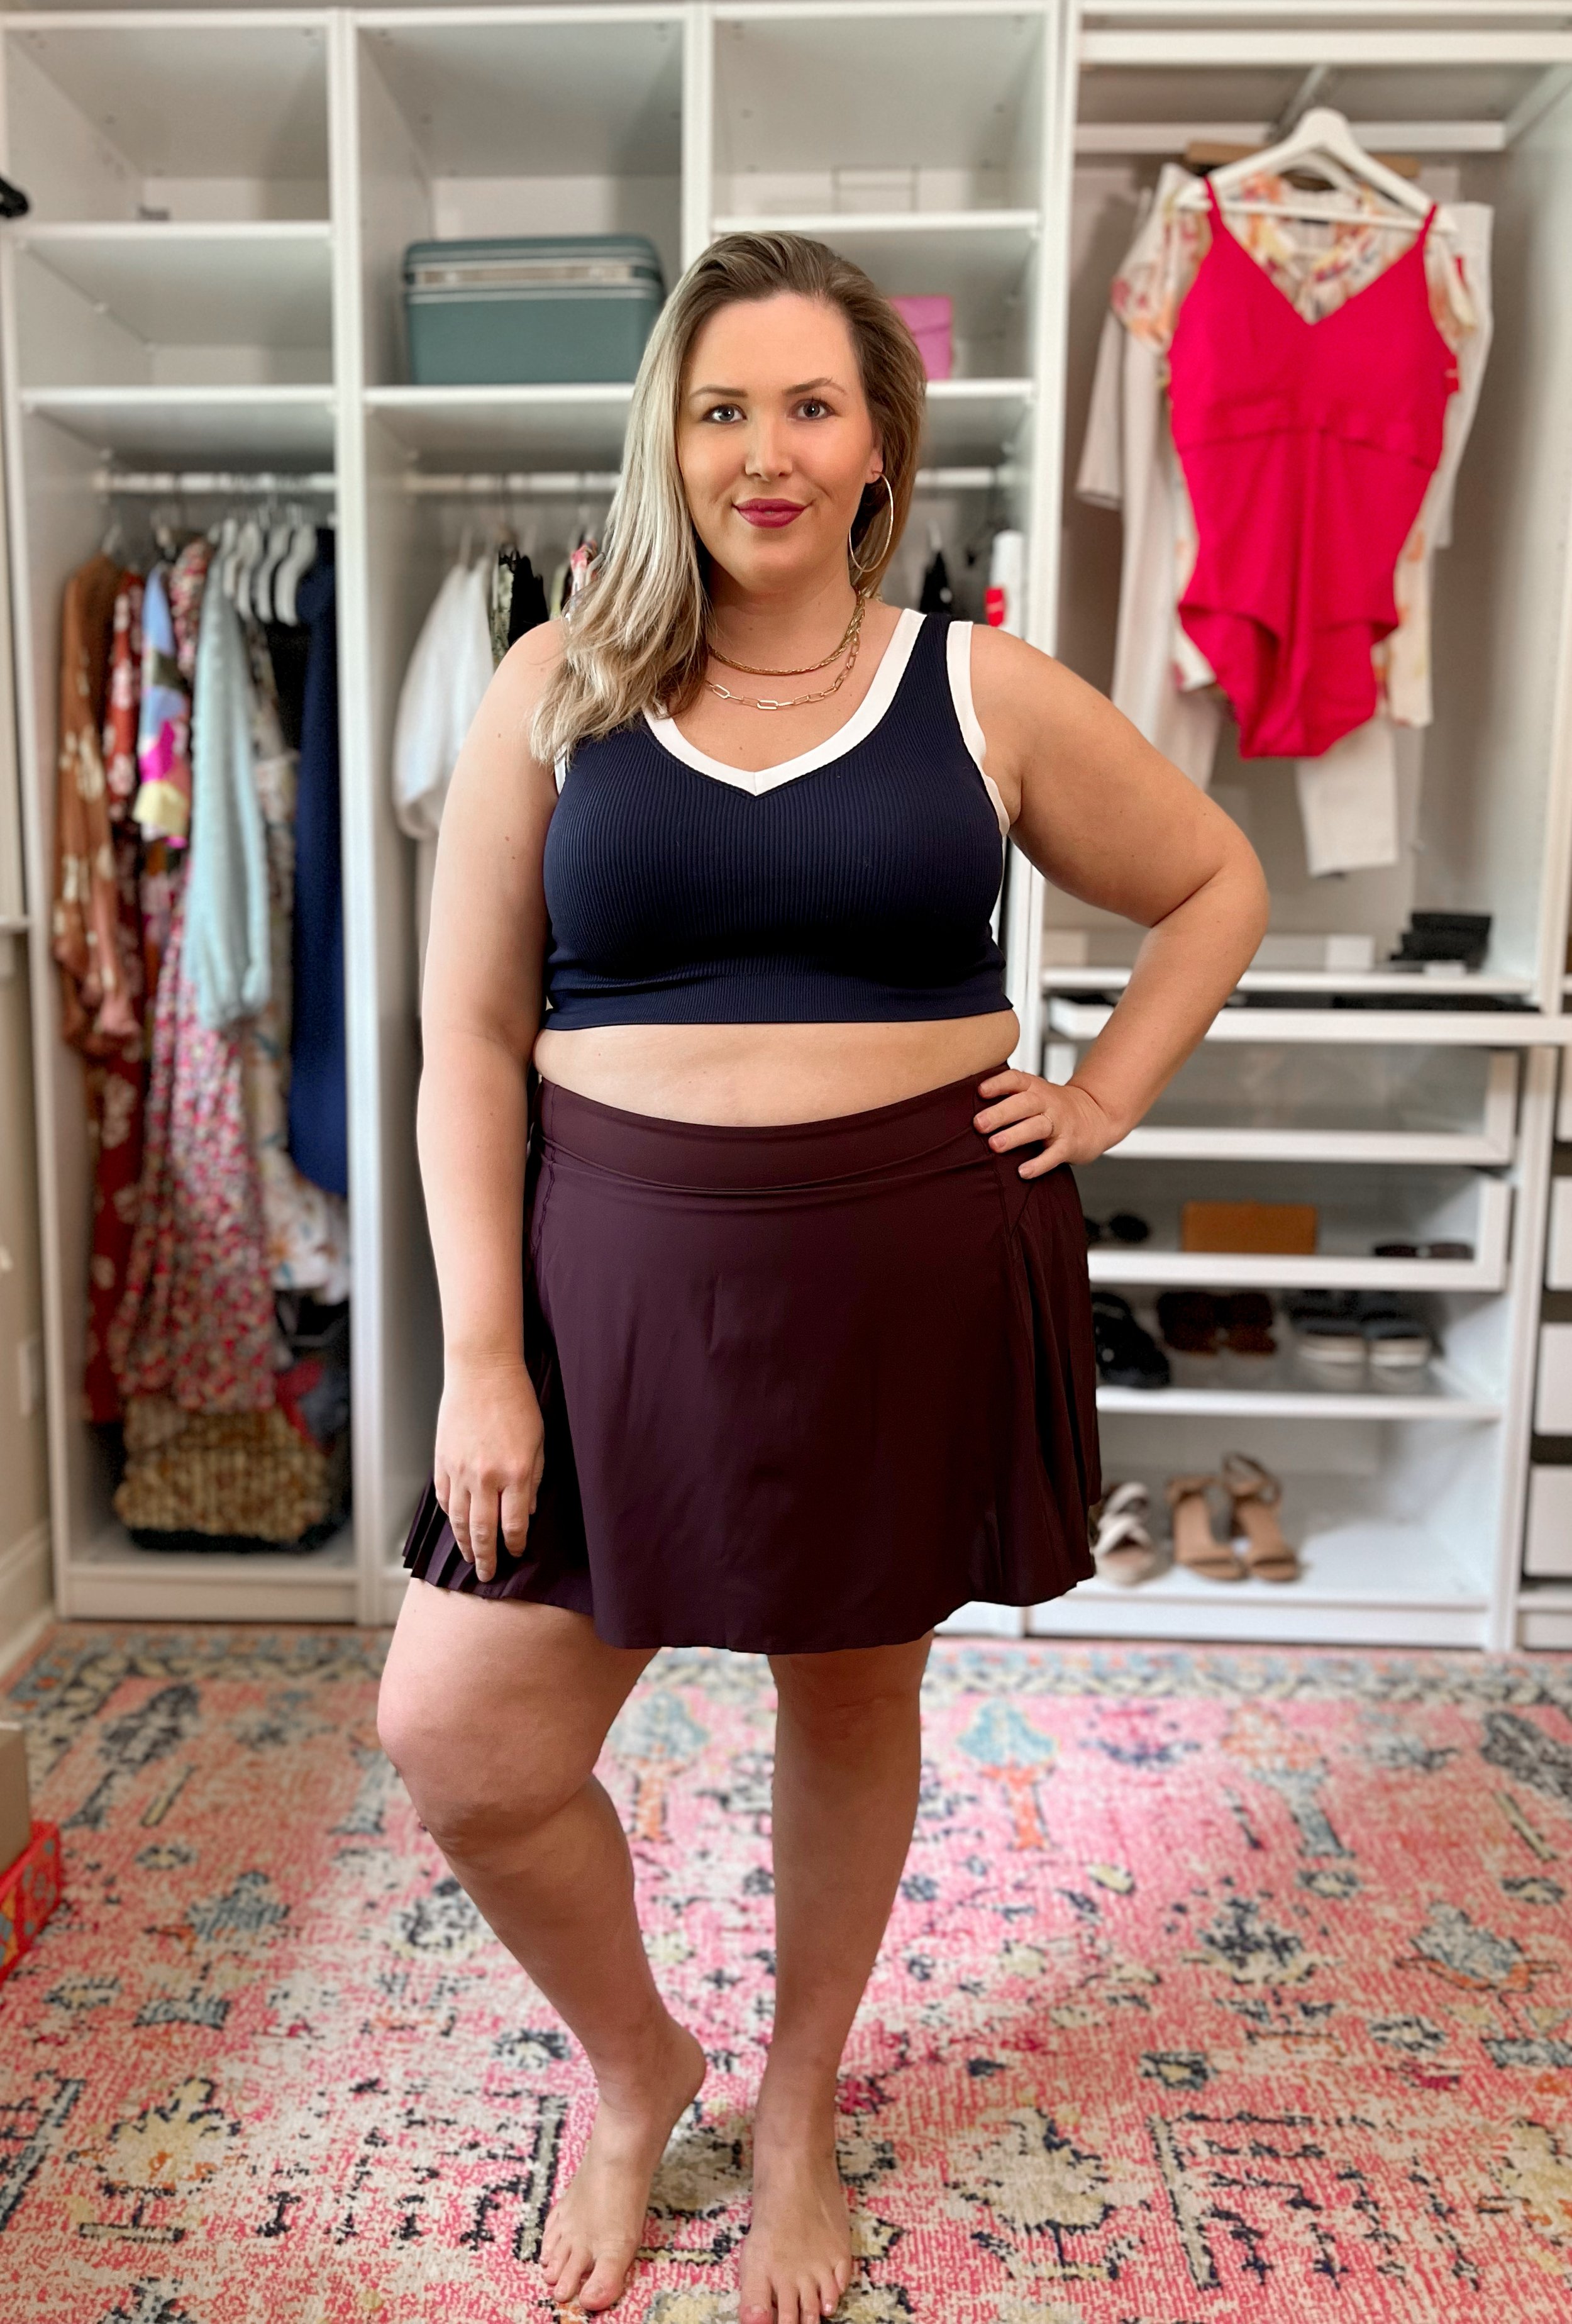 Spanx Try-On Haul: New Bottoms! — House of Dorough